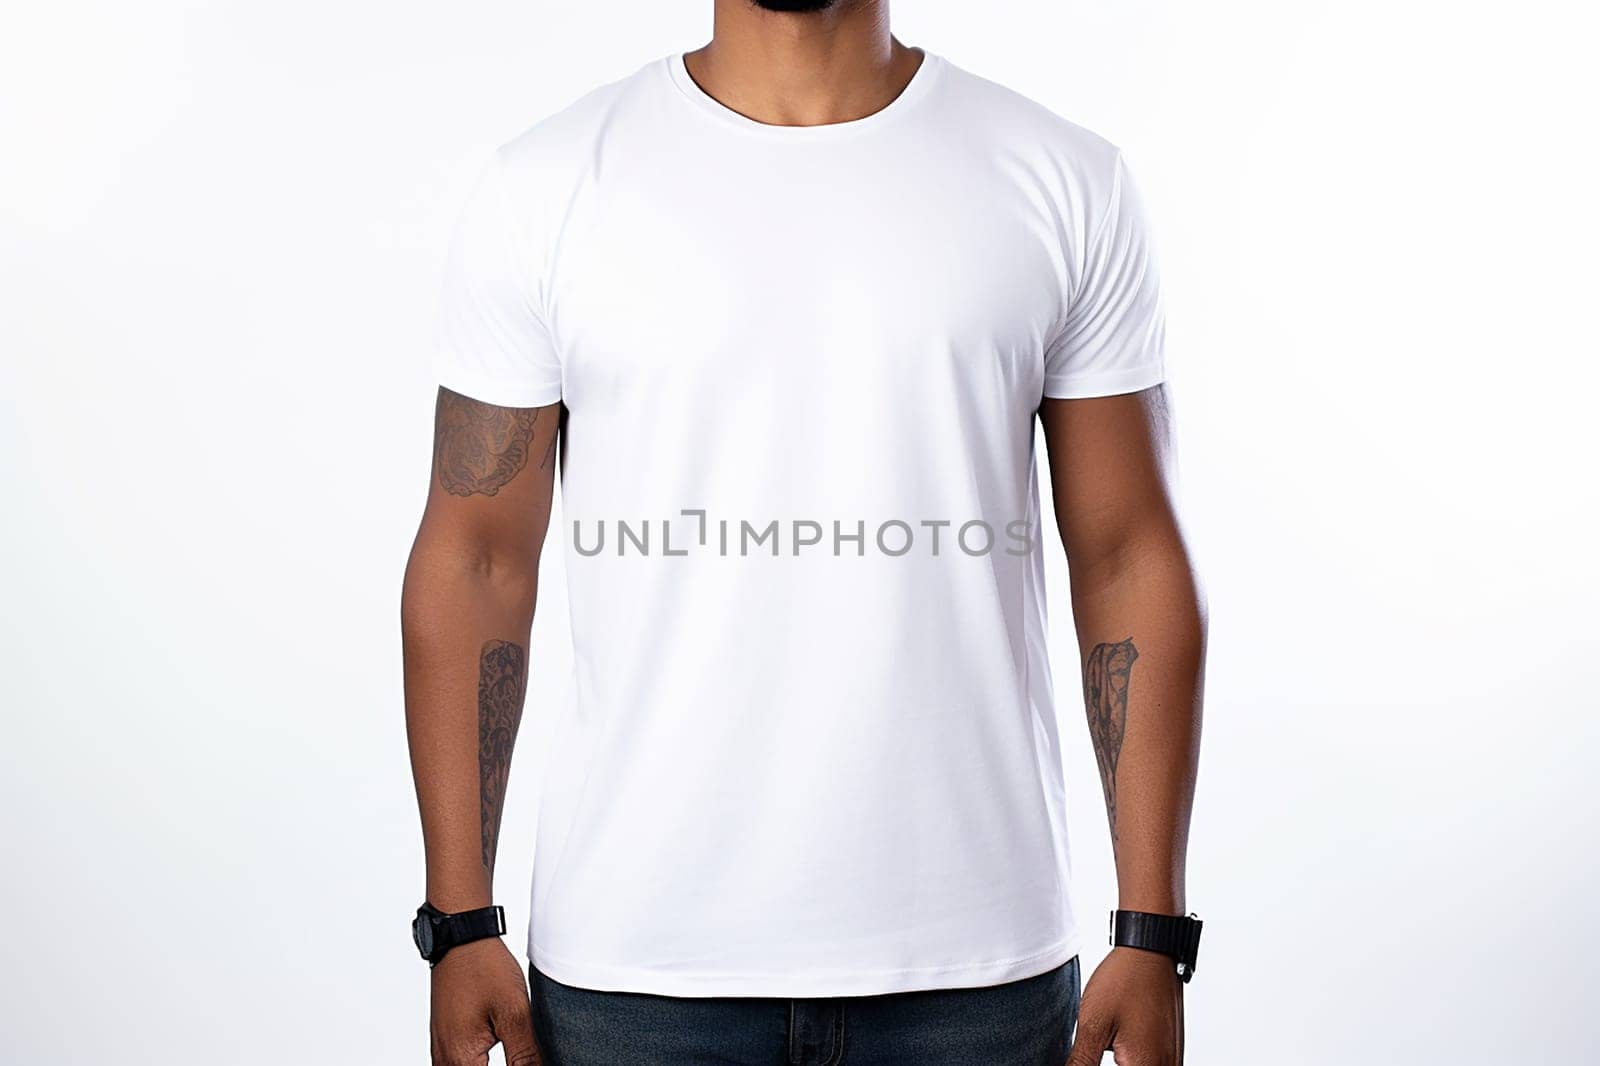 A mock up with a Person in a blank white t-shirt suitable for casual wear or branding by Hype2art